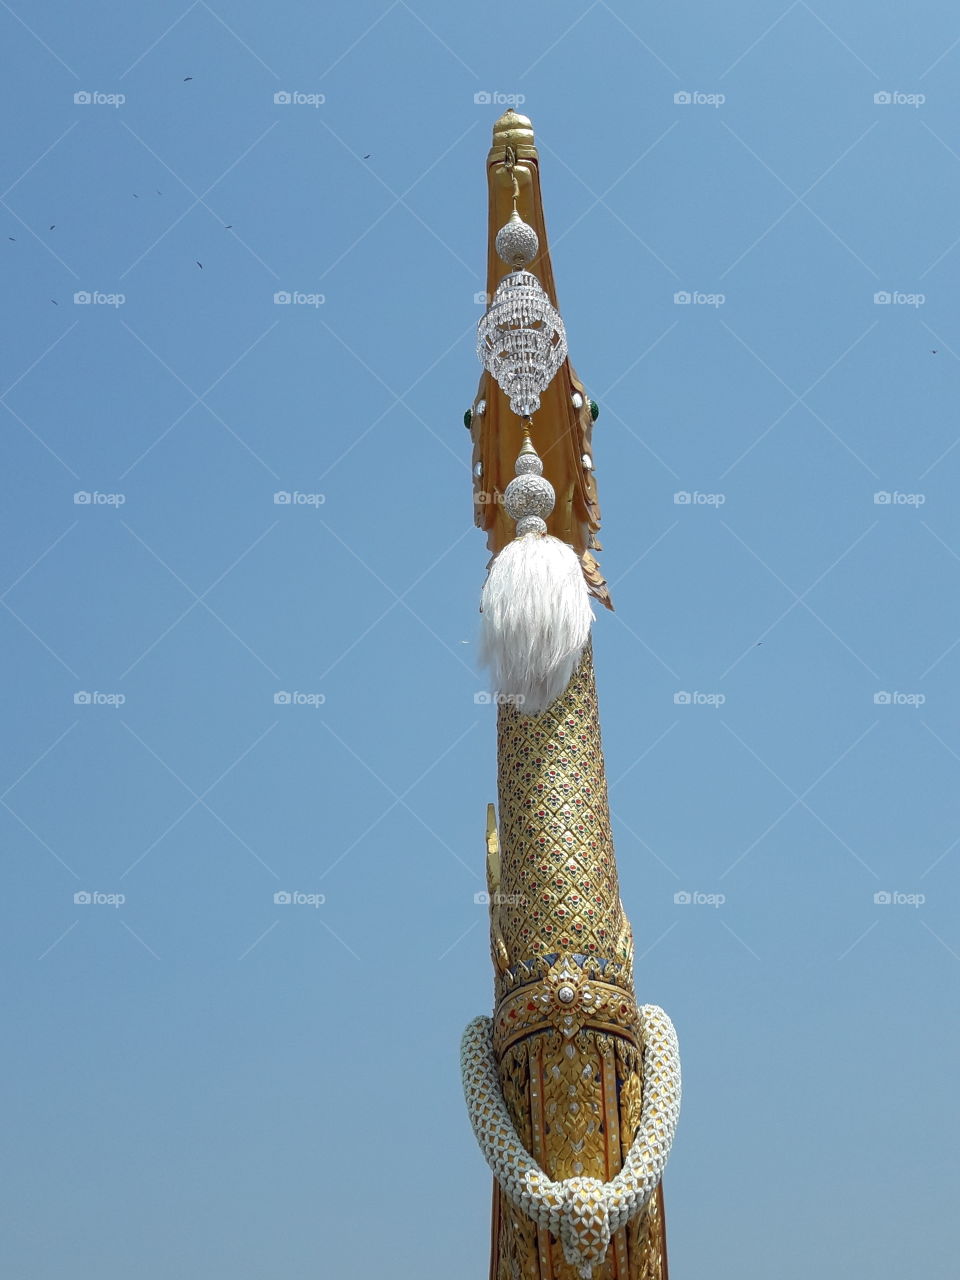 view at below directly to the hamsa's mouth which see the crystalline ball , the dangling tassels also carved pattern with gilded lacquer and mirrored glass decoration on its neck.